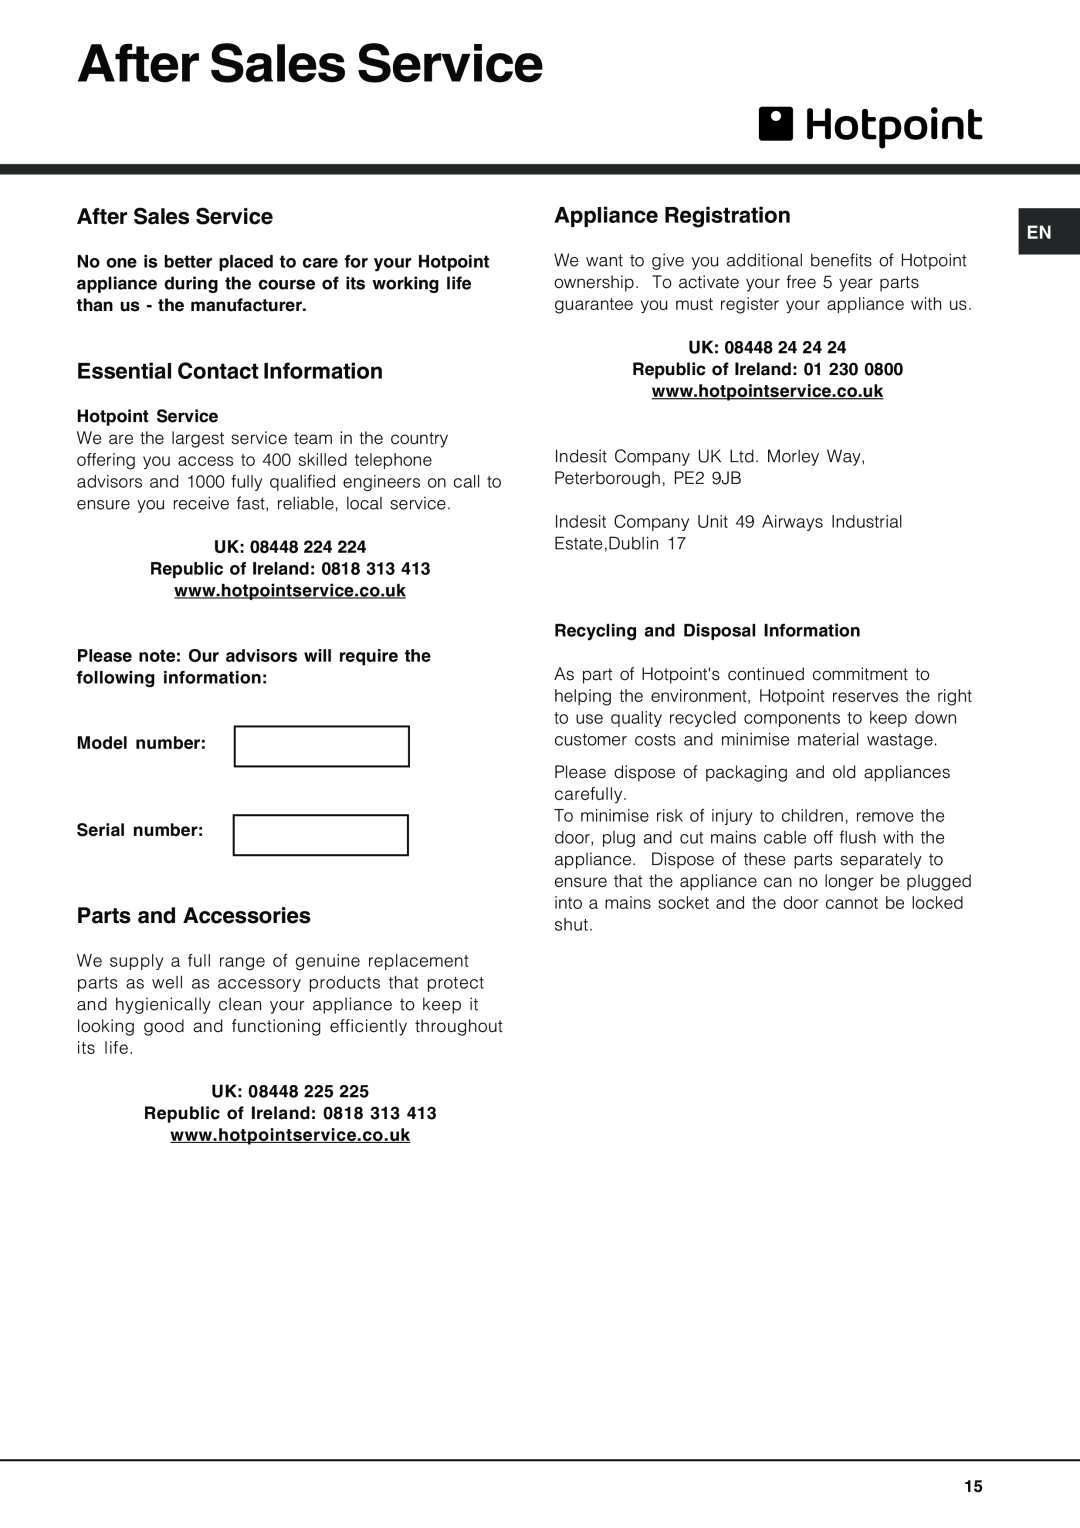 Hotpoint FDUD 4812 manual After Sales Service, Essential Contact Information, Parts and Accessories, Appliance Registration 